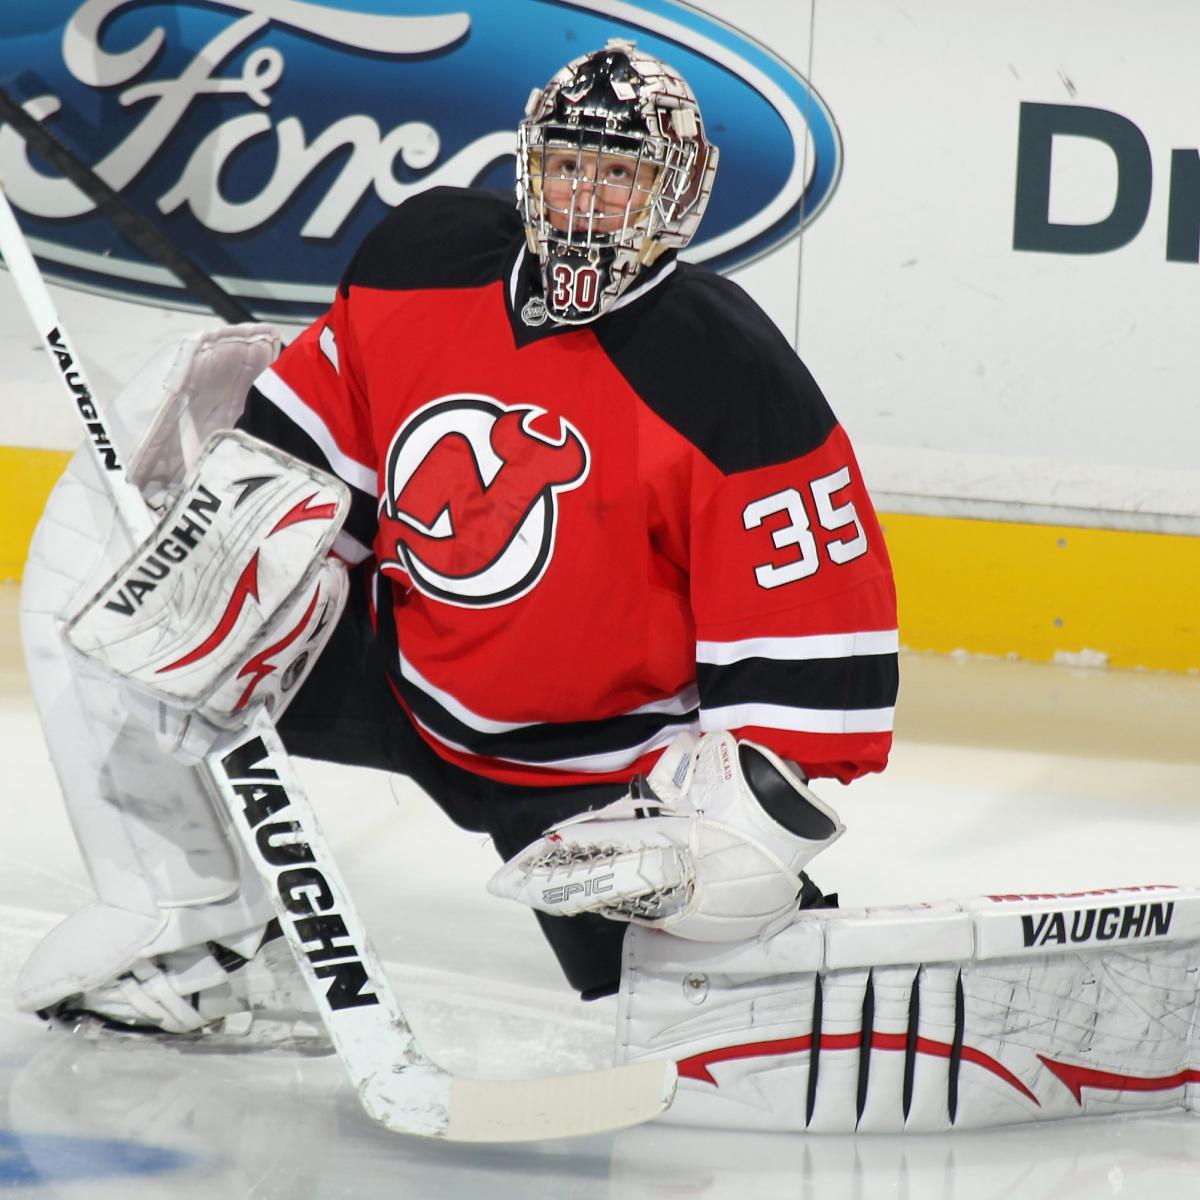 Wedgewood brilliant in shutout of Devils, his former team